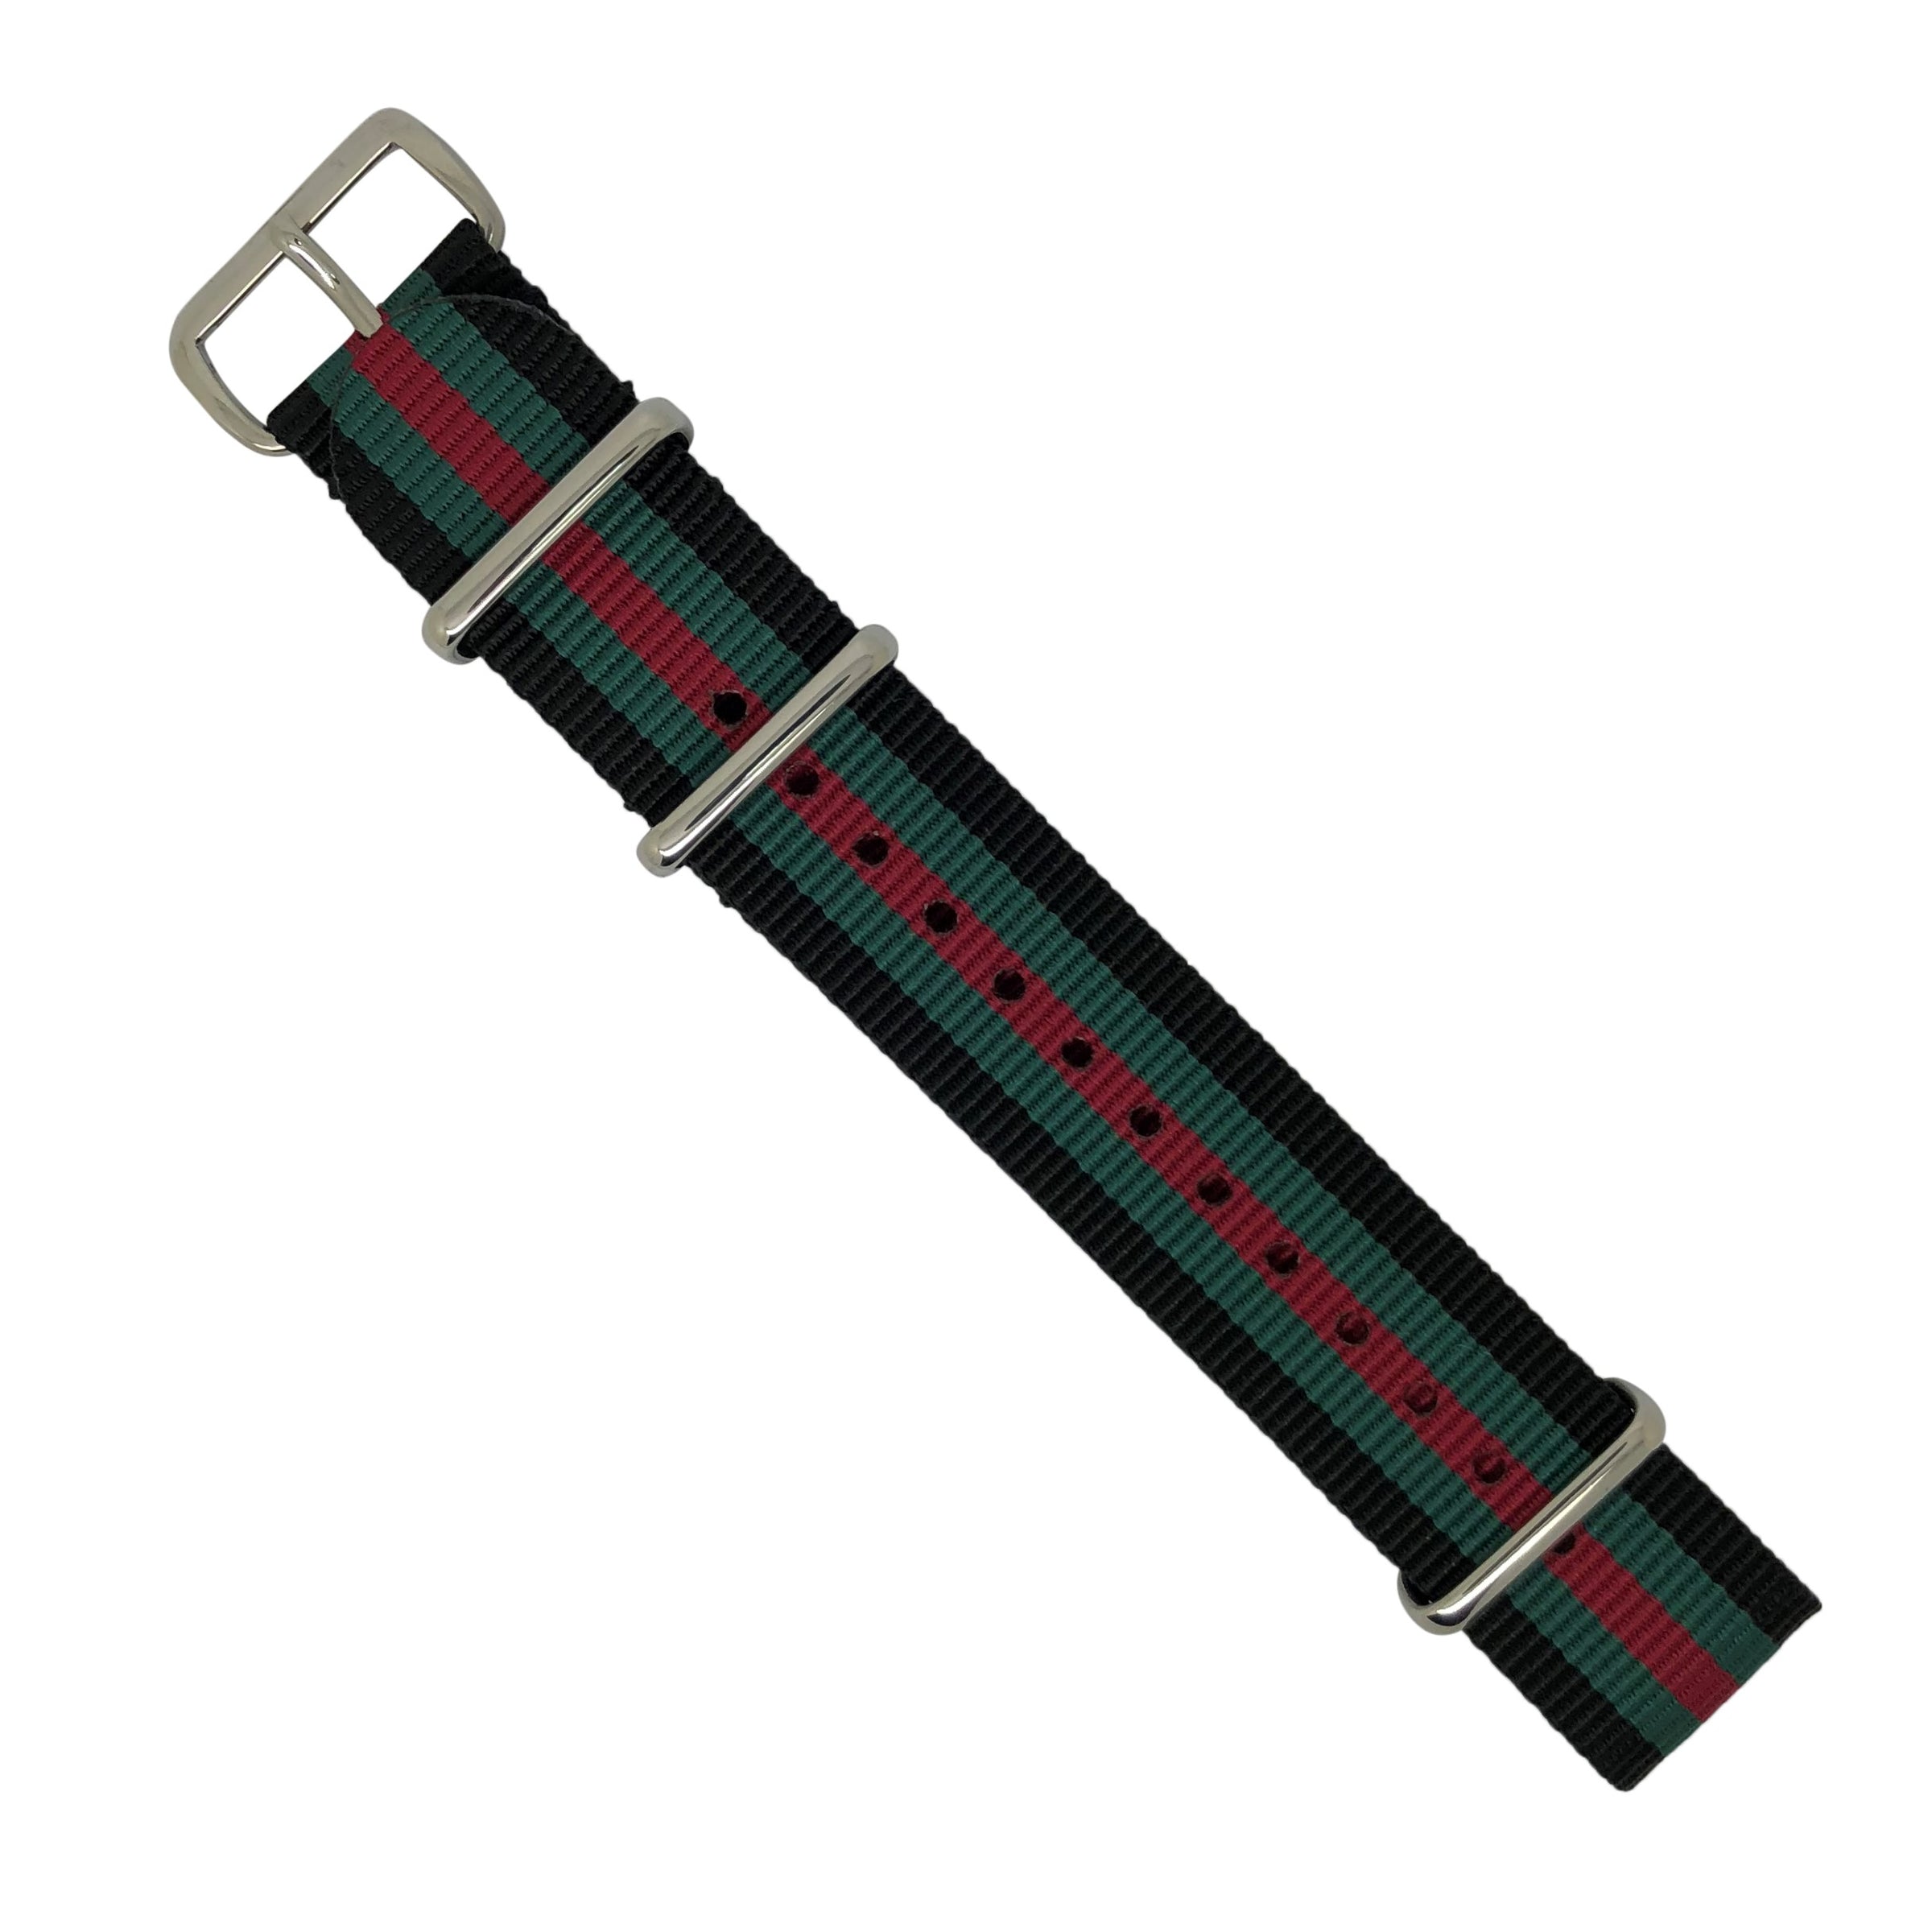 Premium Nato Strap in Black Green Red with Polished Silver Buckle (20mm) - Nomad watch Works